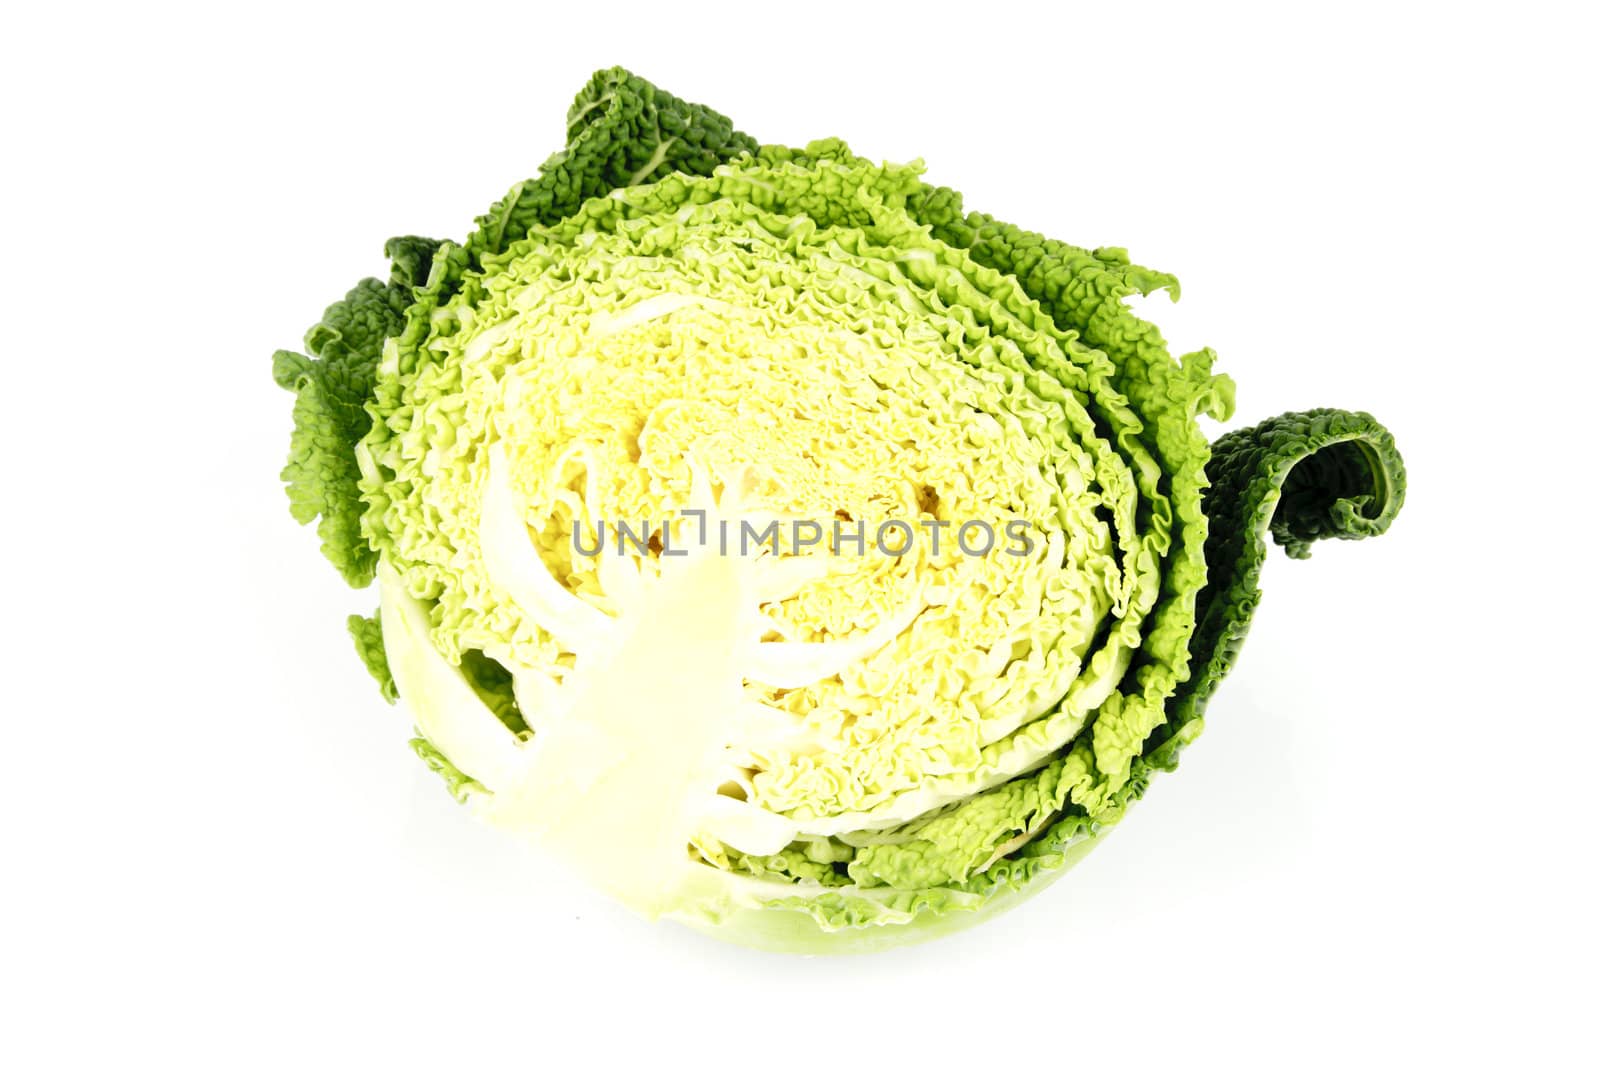 Half a raw green cabbage on a reflective white background